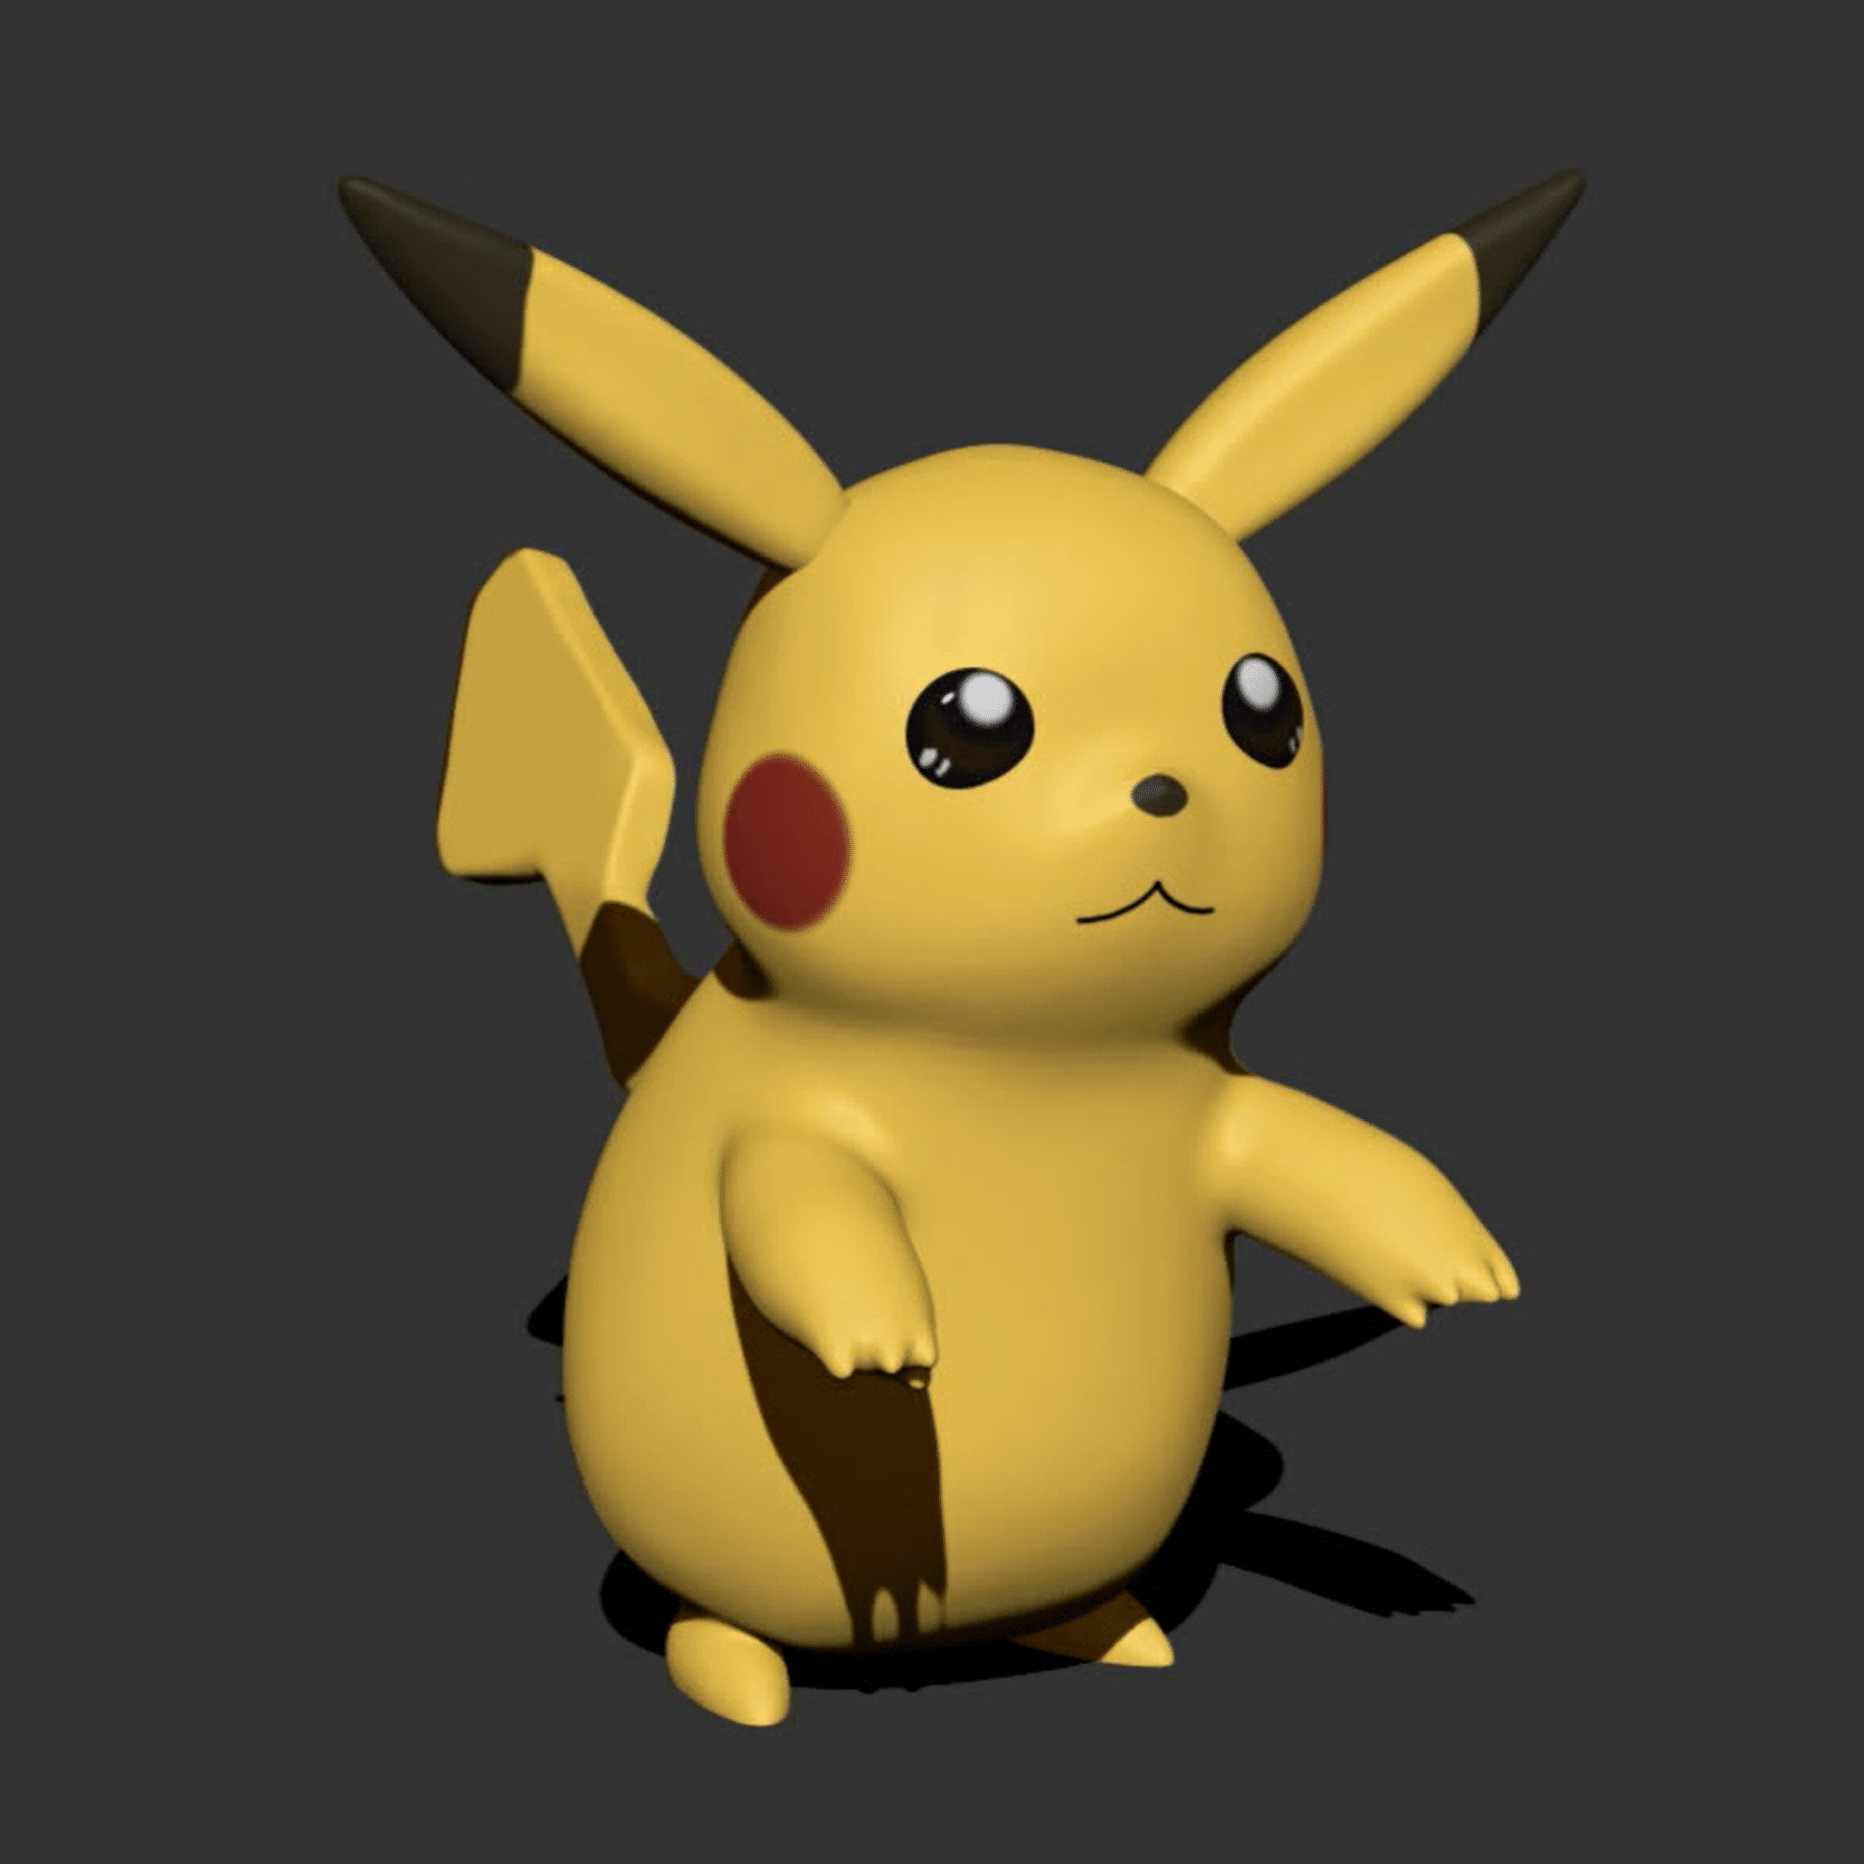 capture - Characters From the 3D Modeling Workshop